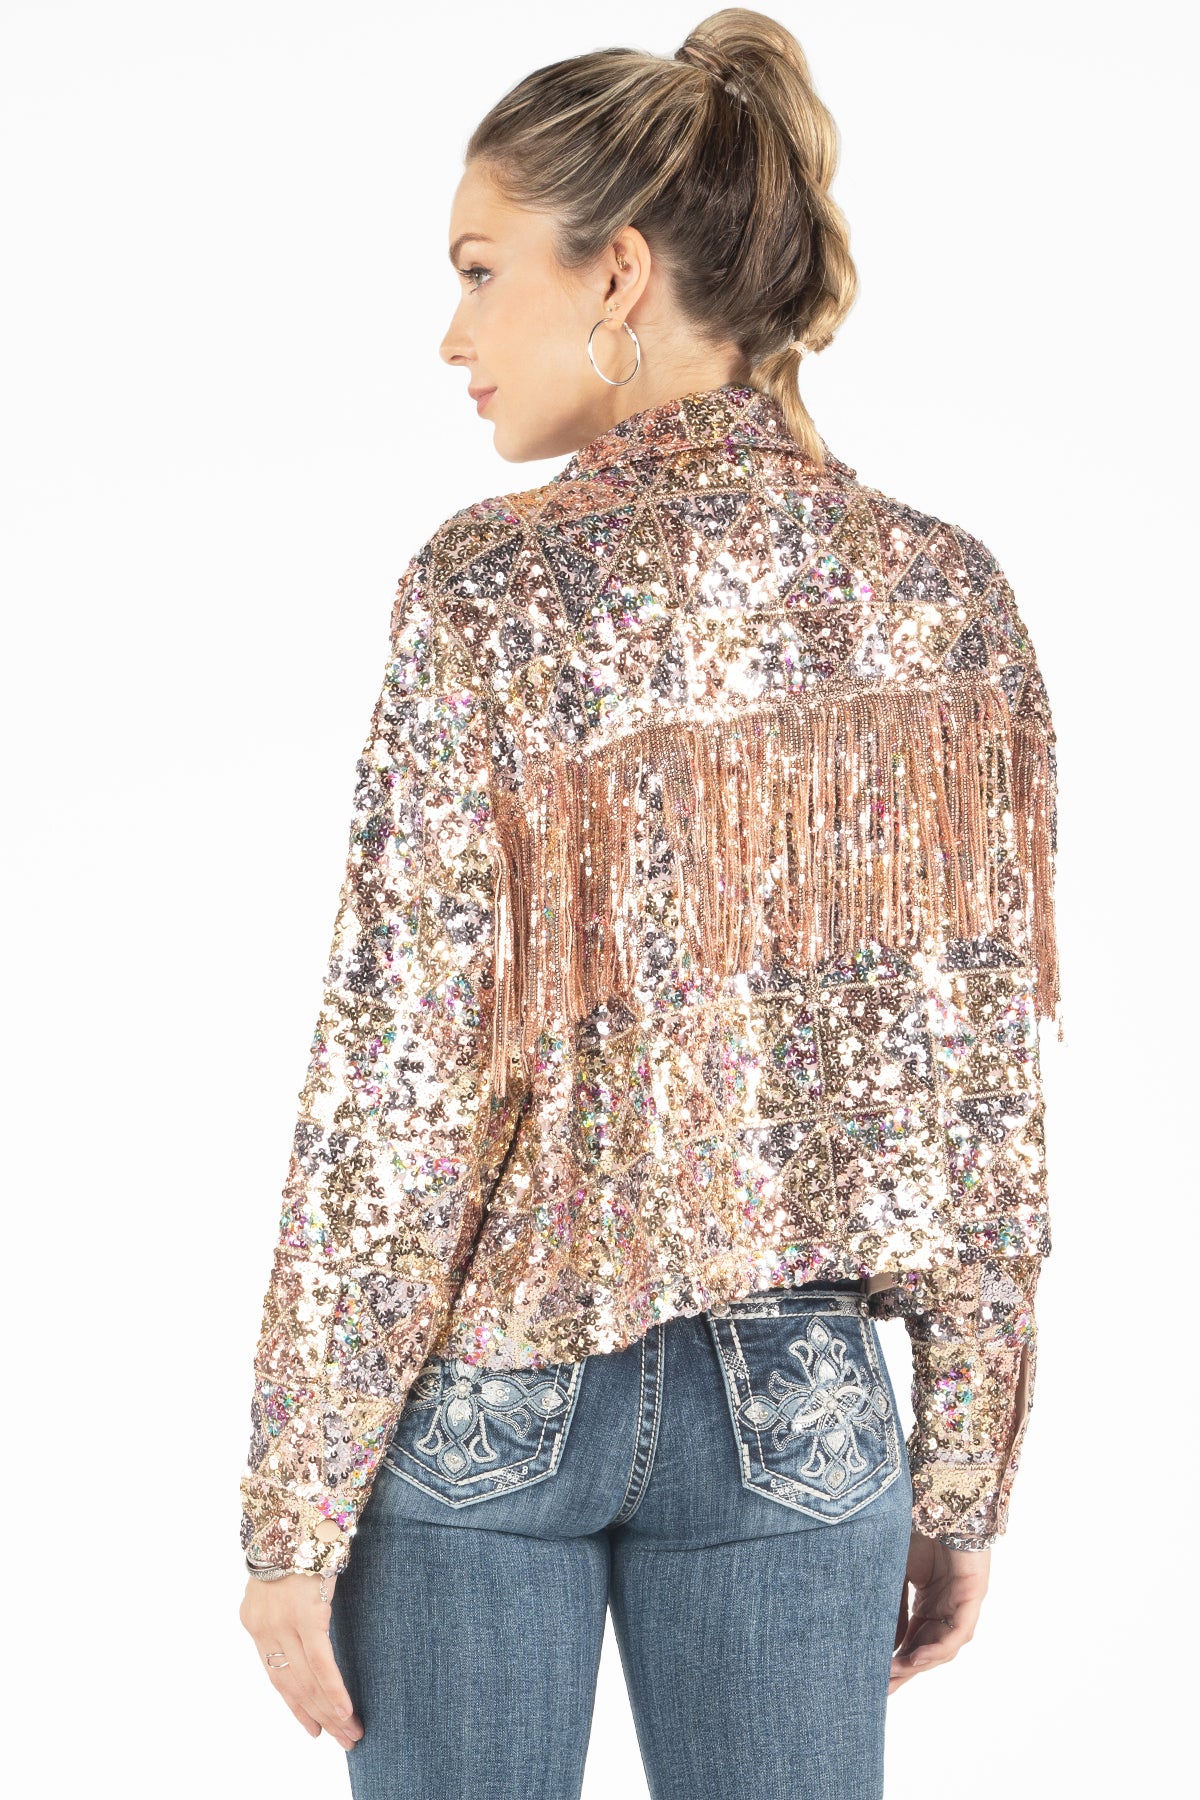 Geometric Sequin Fringe Jacket, Only $94.00, Multi Green, Red Wine, Rose  Gold